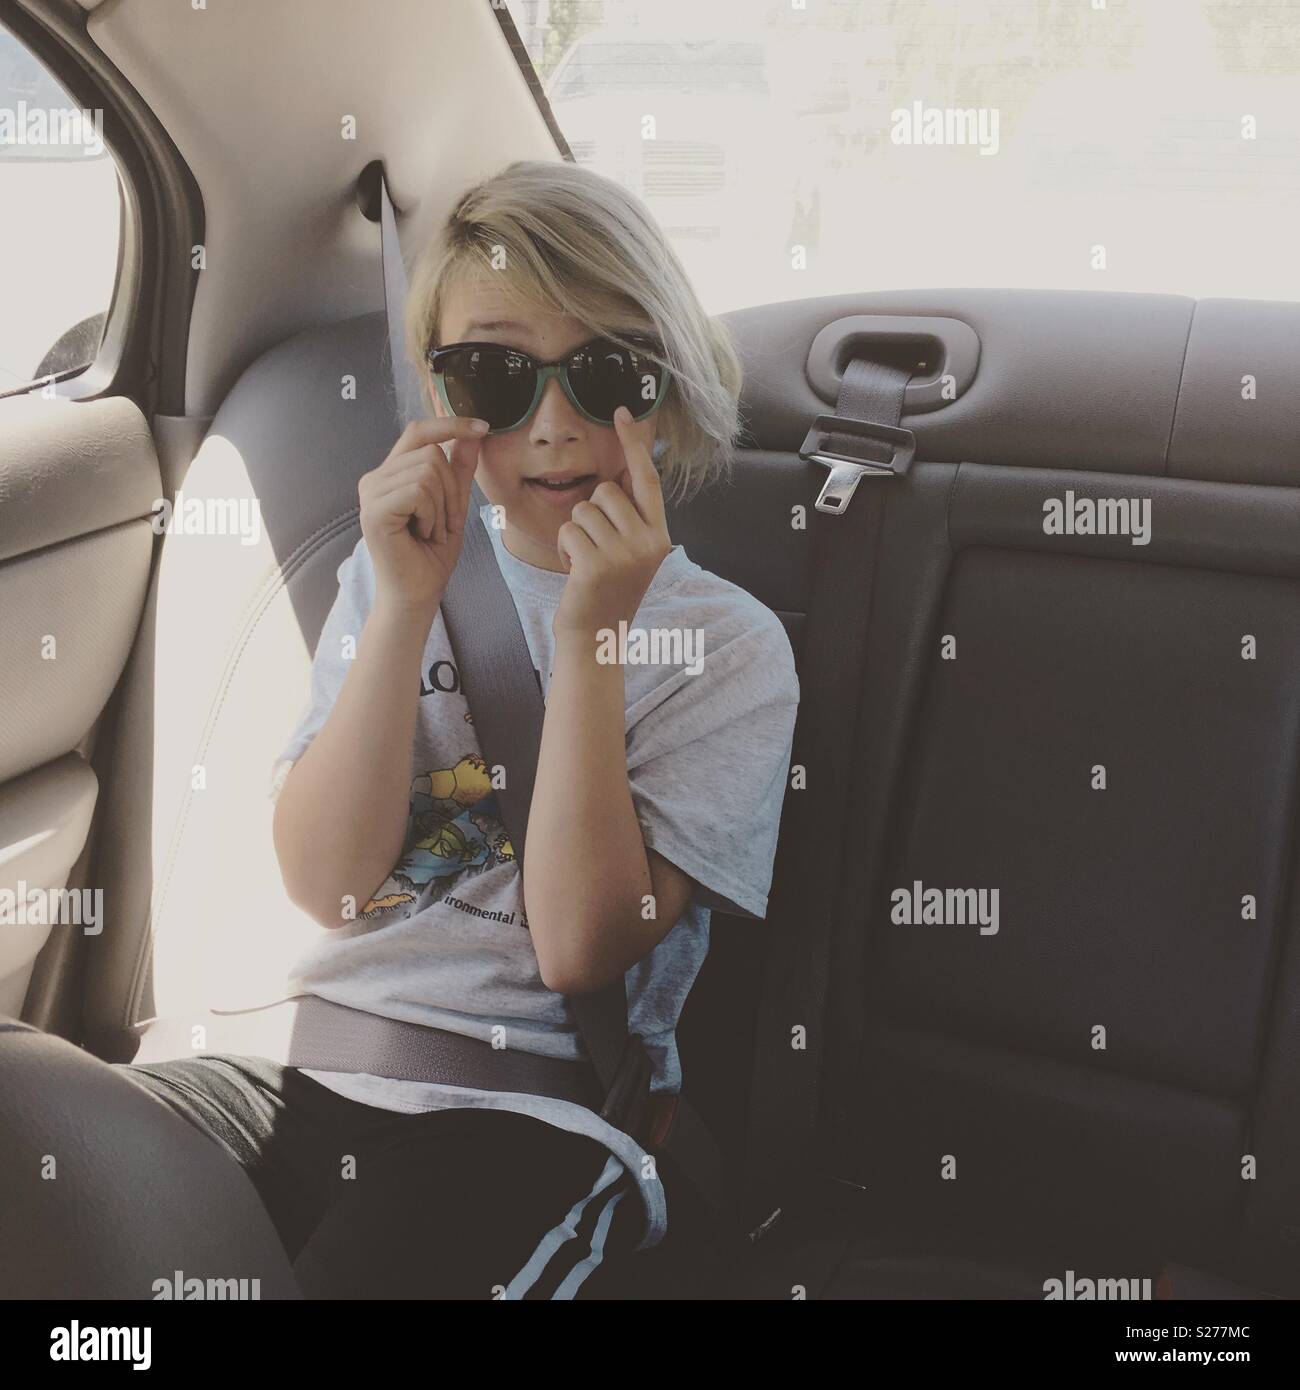 A child riding in the backseat of a car. Stock Photo